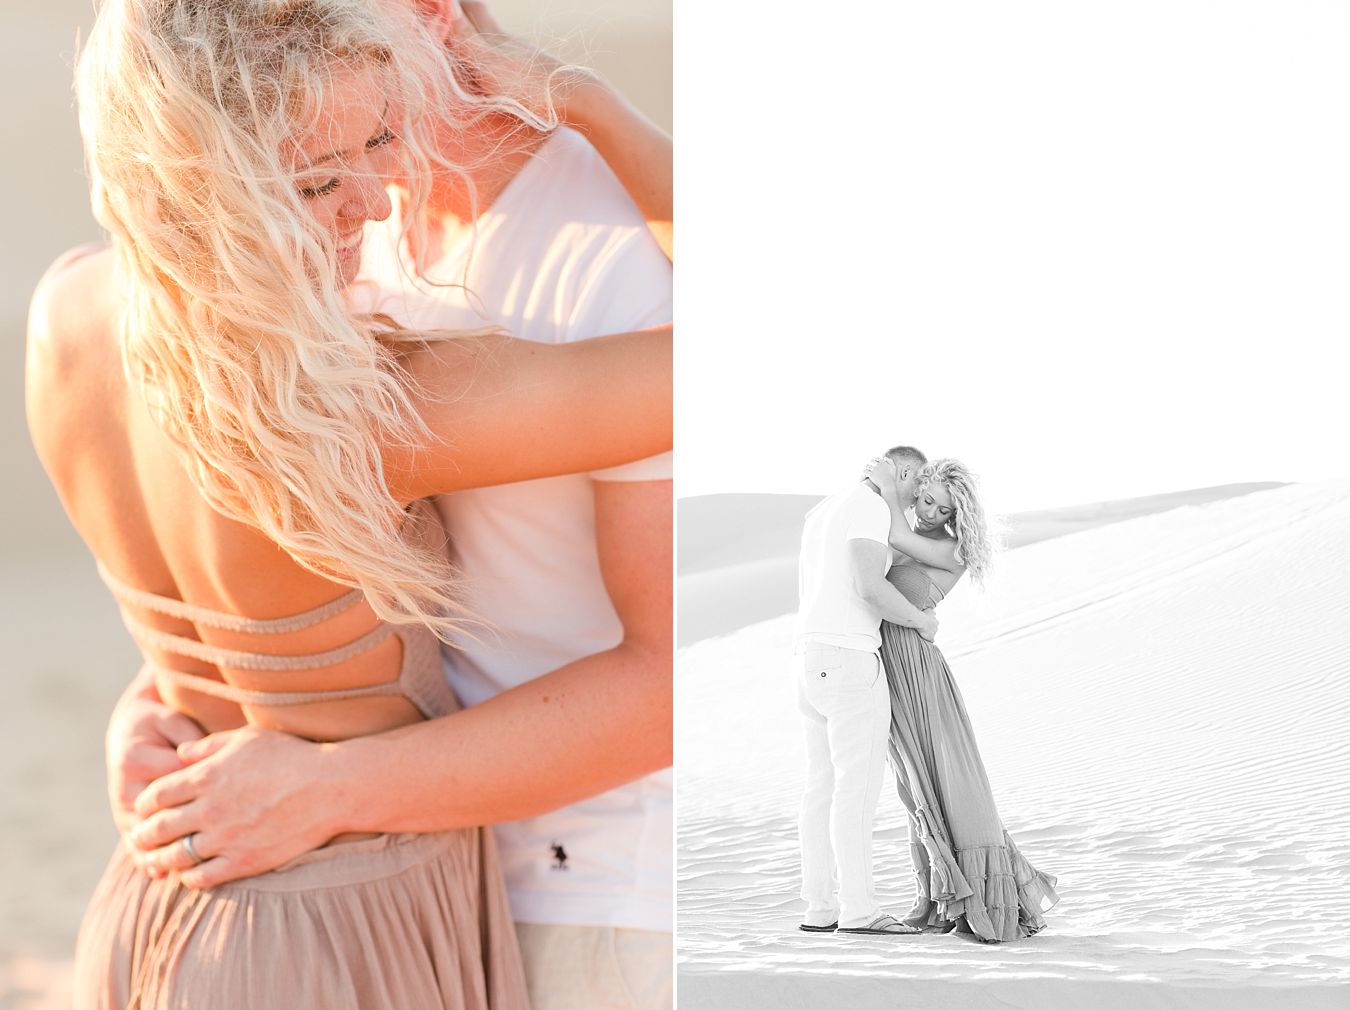 engagement session in sand dunes